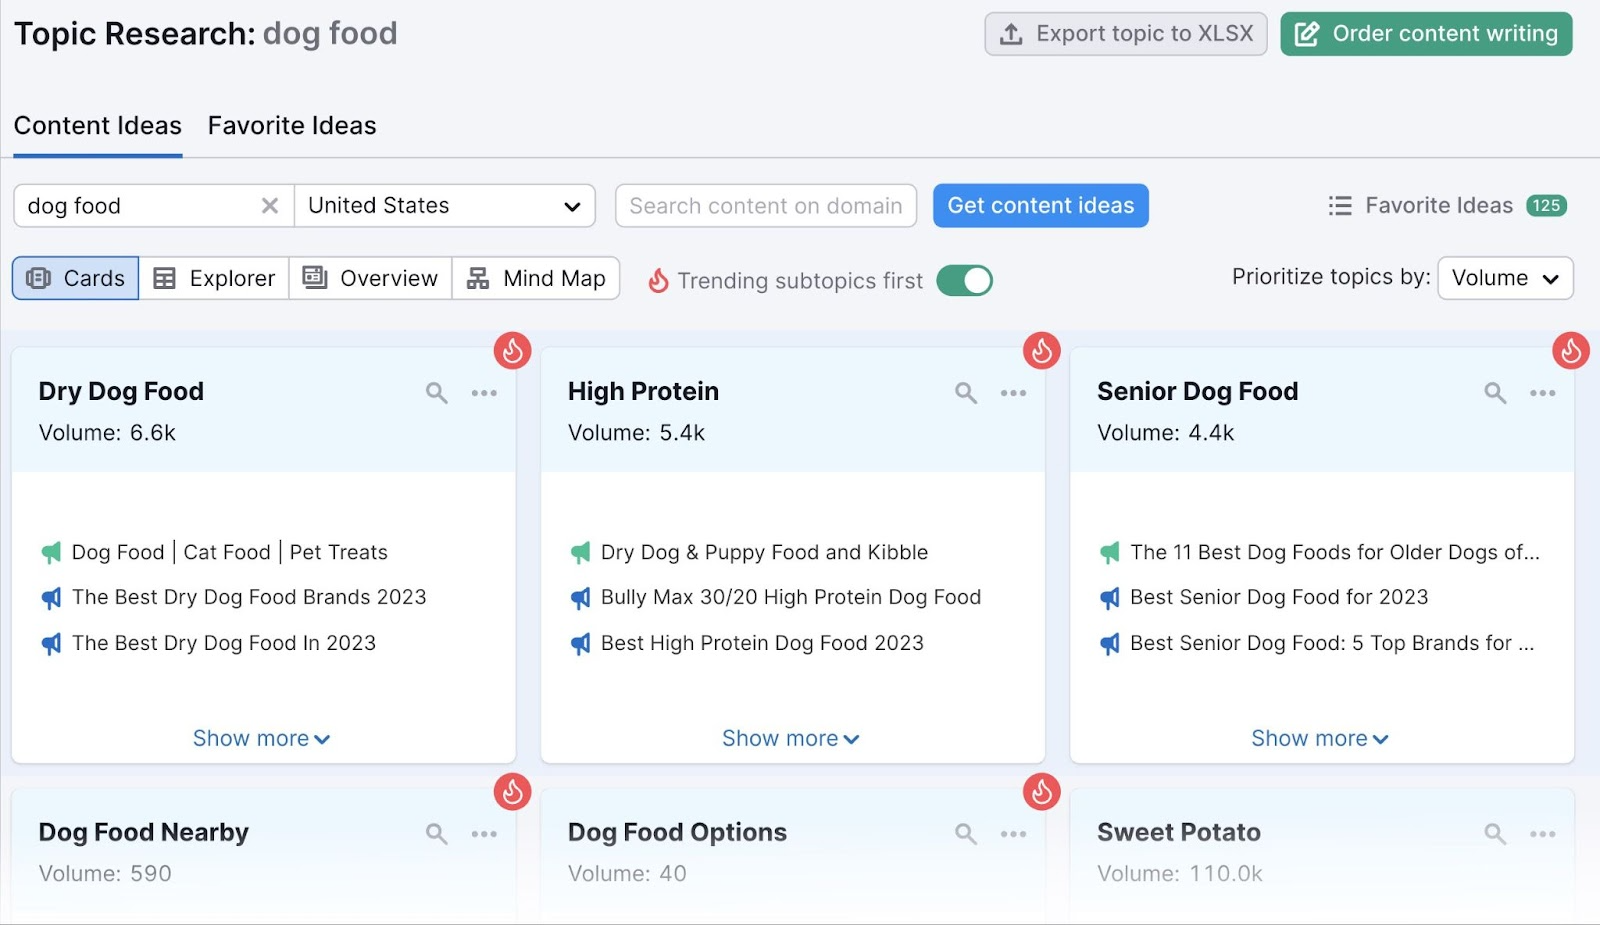 "Content ideas" tab shown for "dog food" search